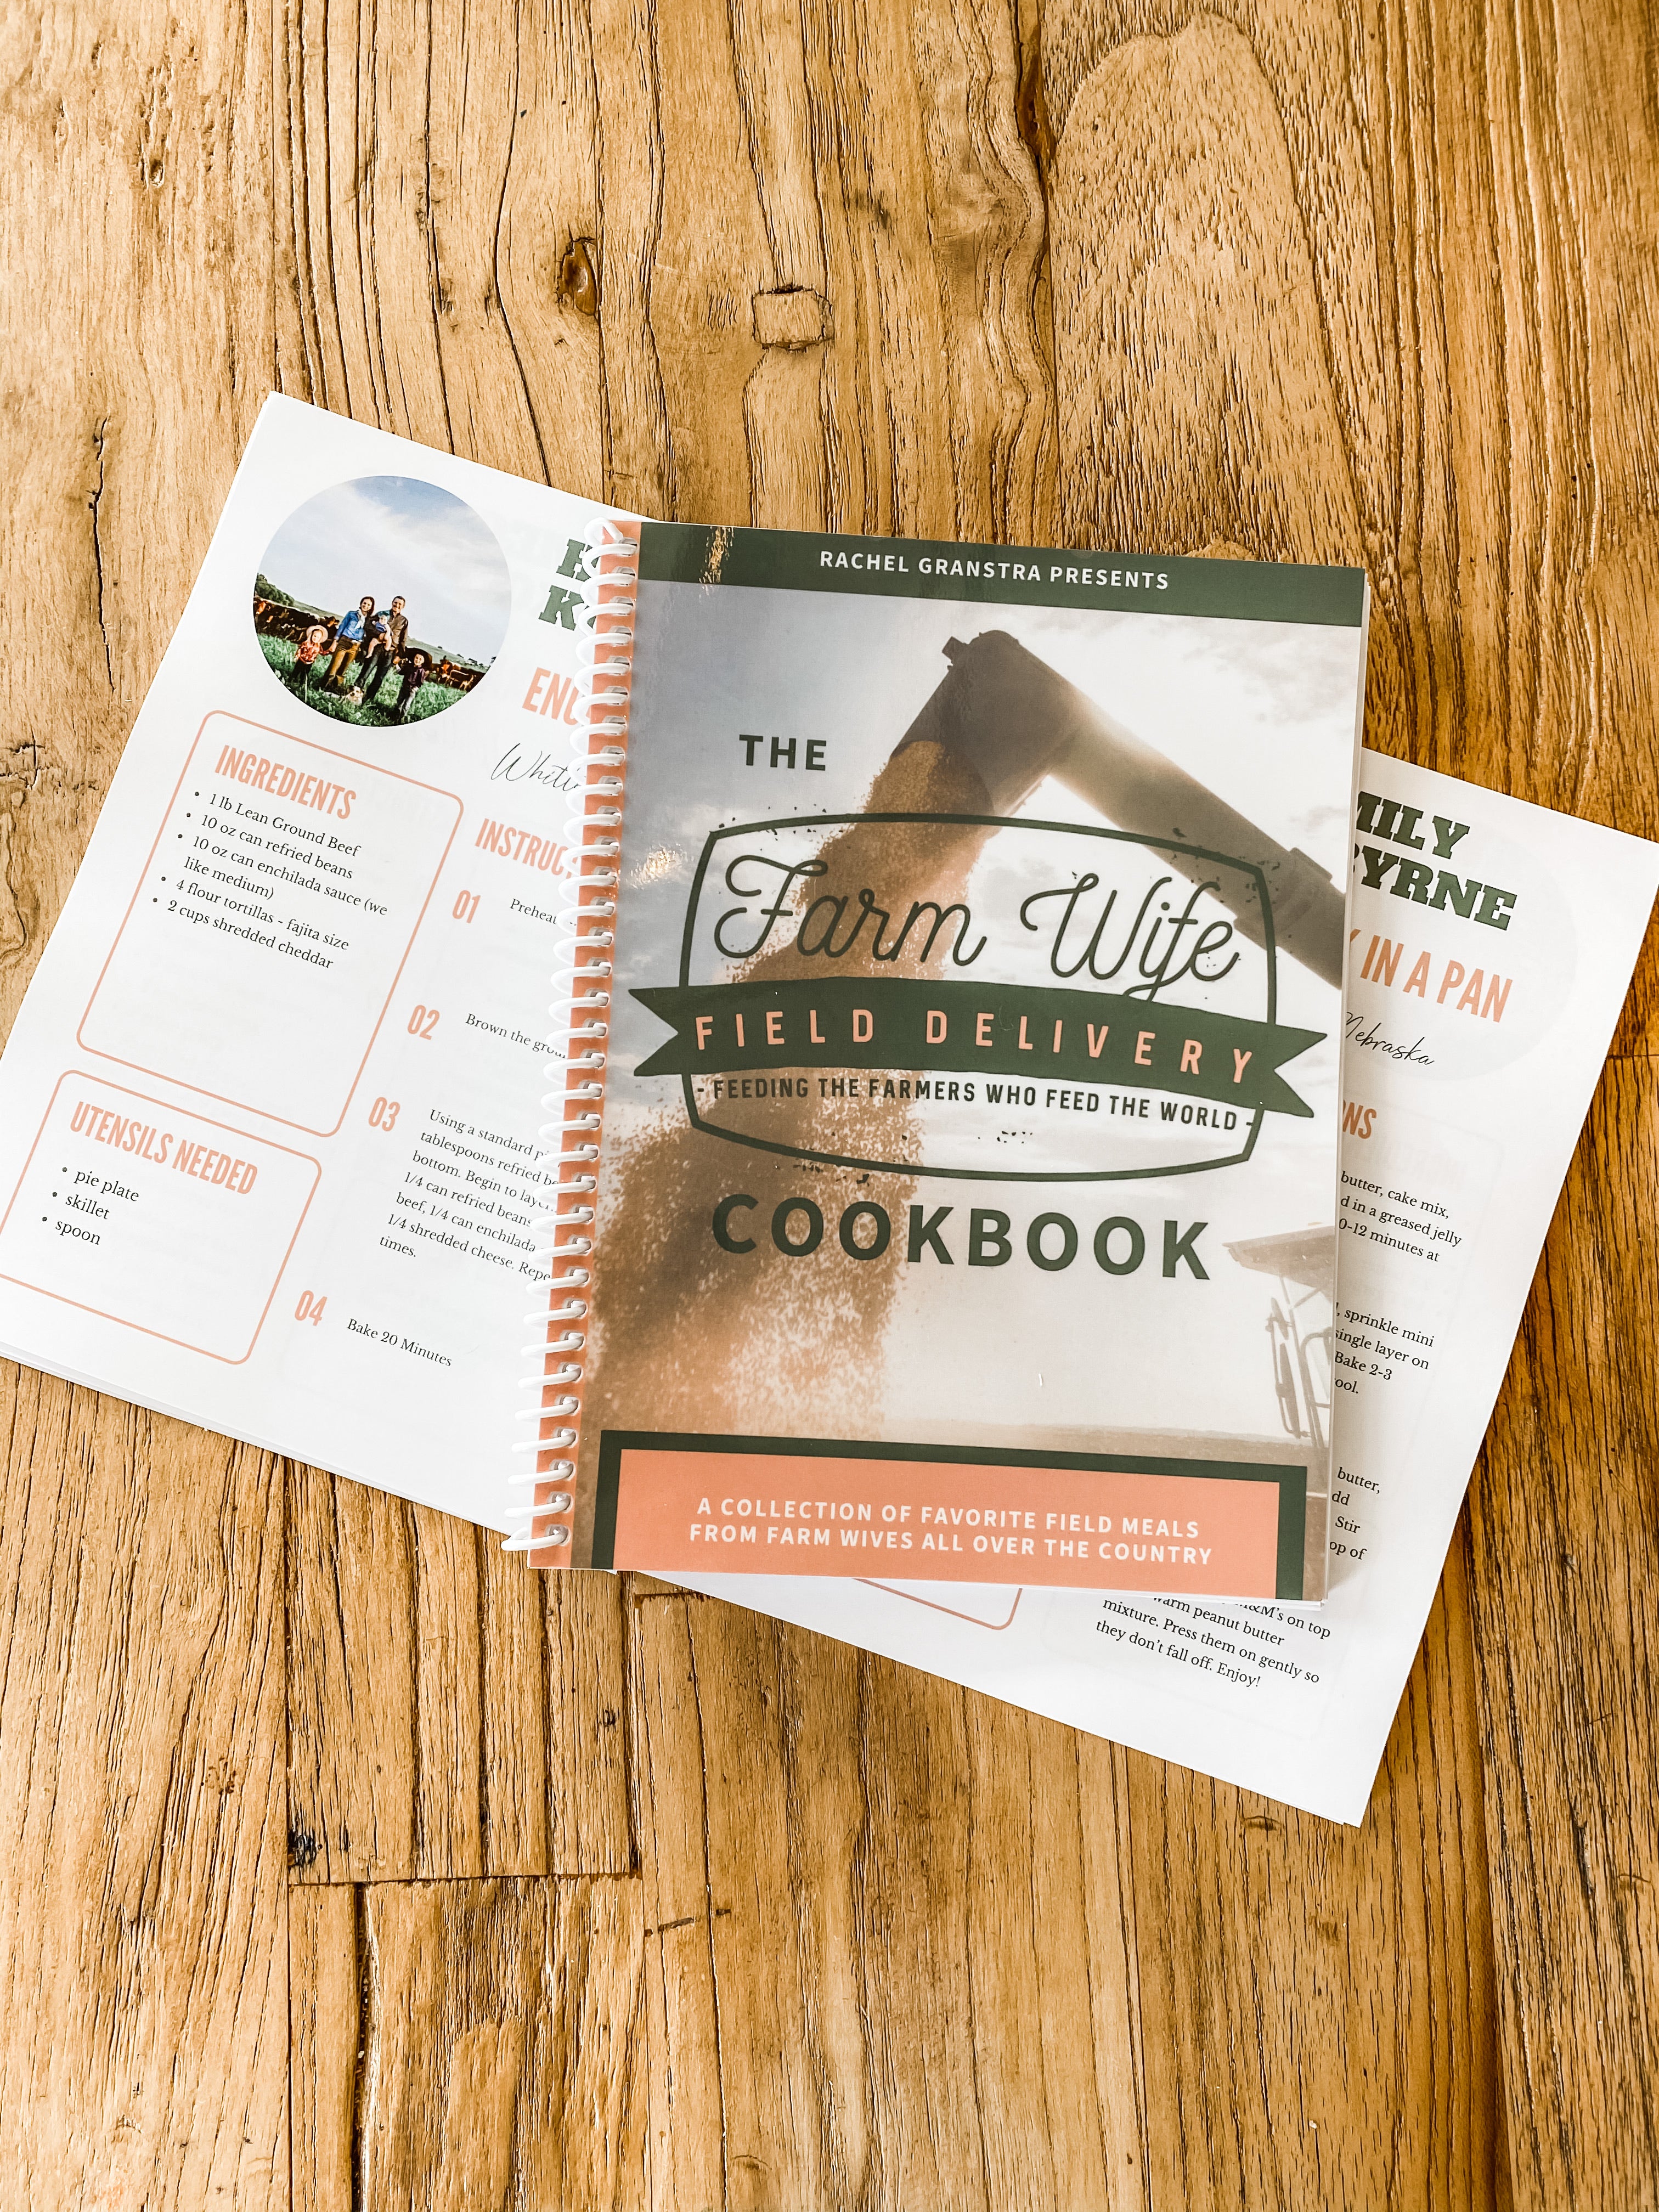 The inside of farm wife field delivery cookbook